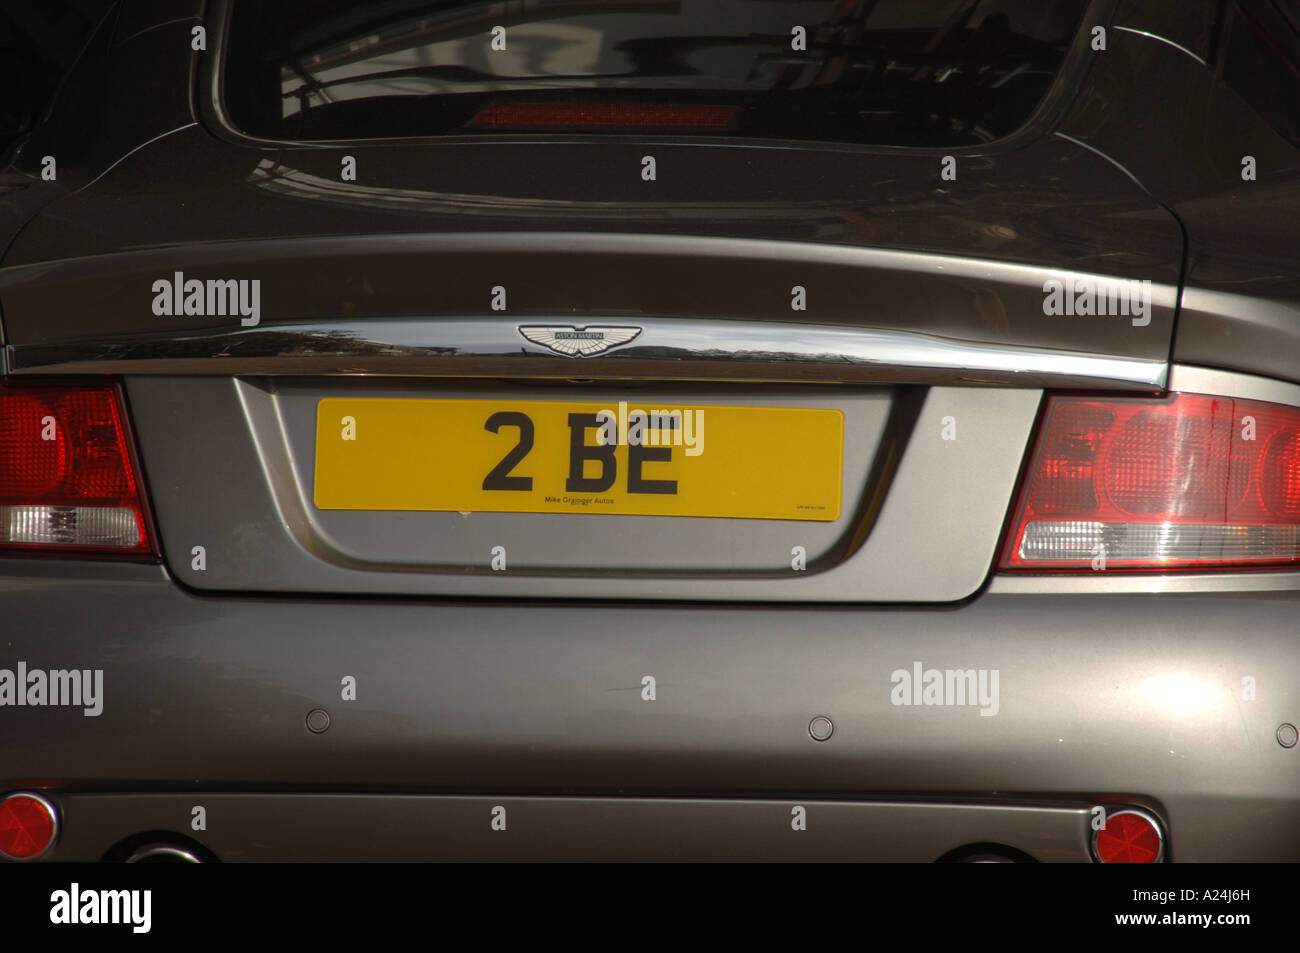 2 be personalised number plate Aston Martin. Quote from Hamlet by William  Shakespeare "To be, or not to be, that is the question Stock Photo - Alamy